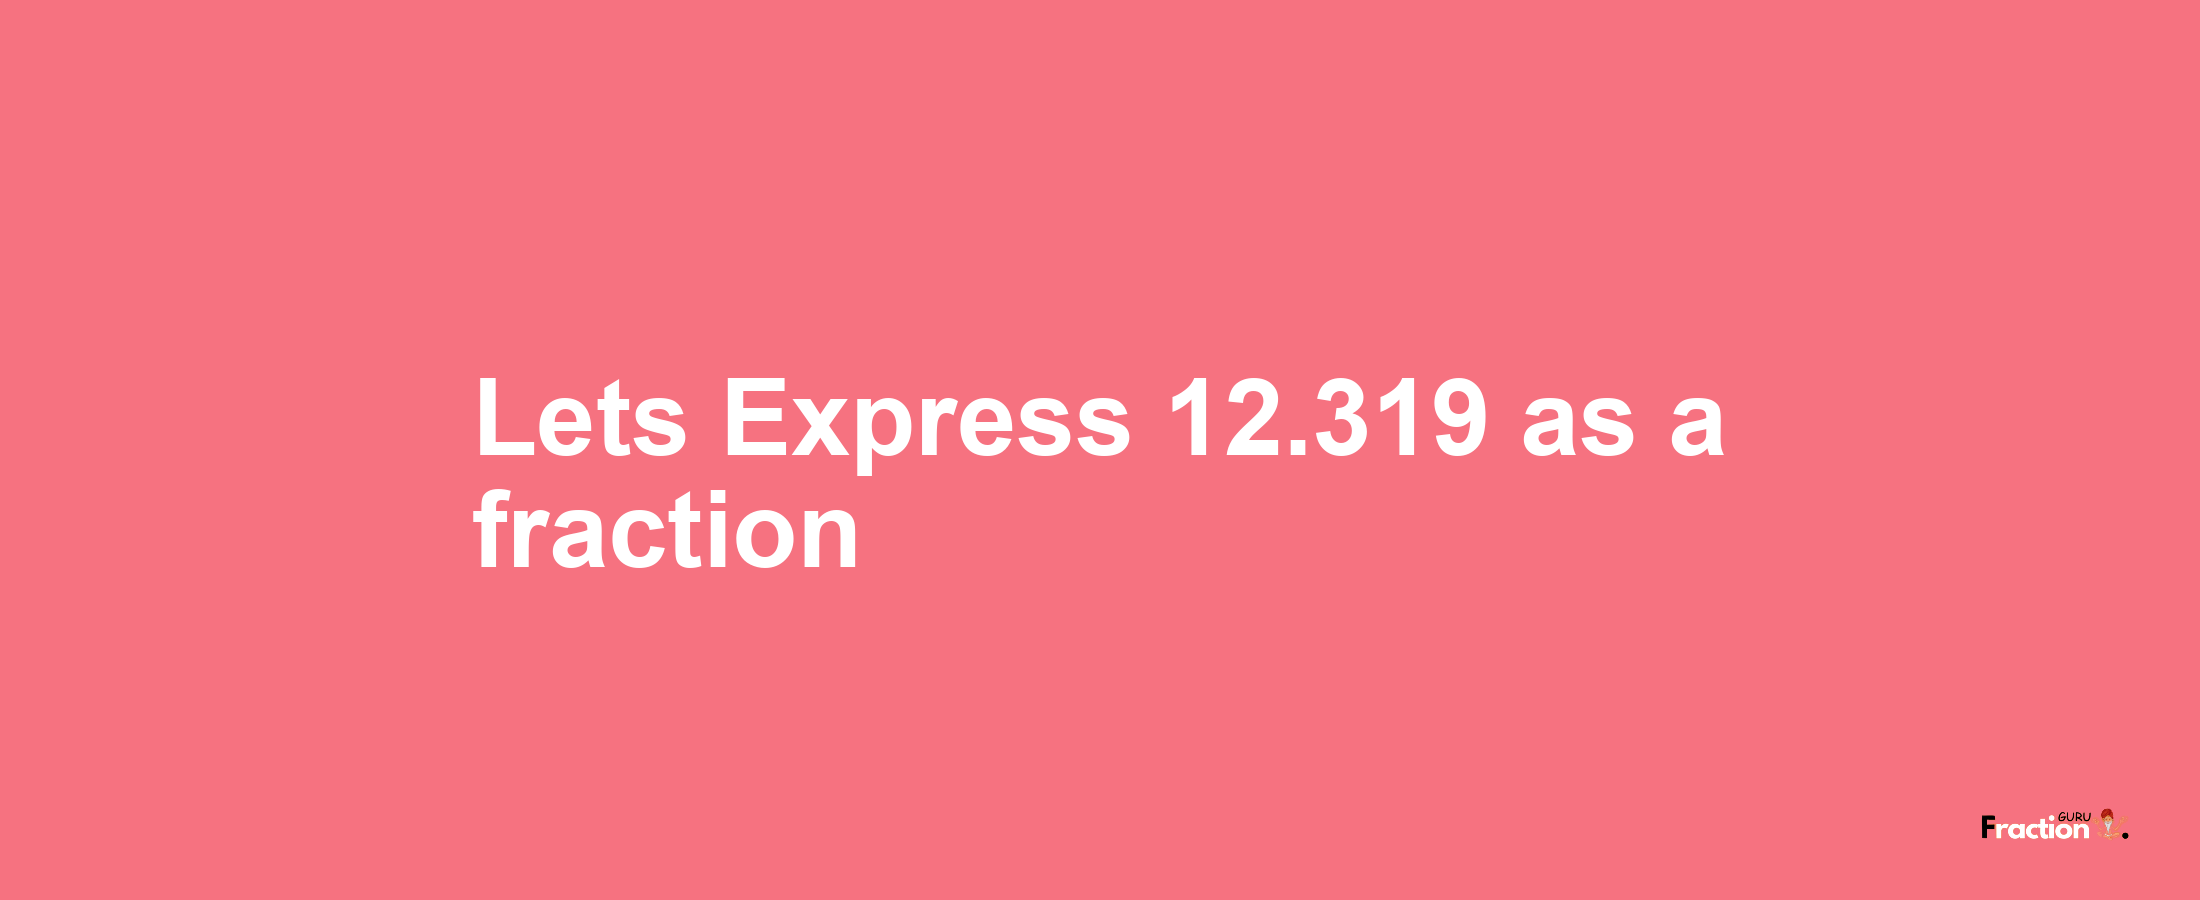 Lets Express 12.319 as afraction